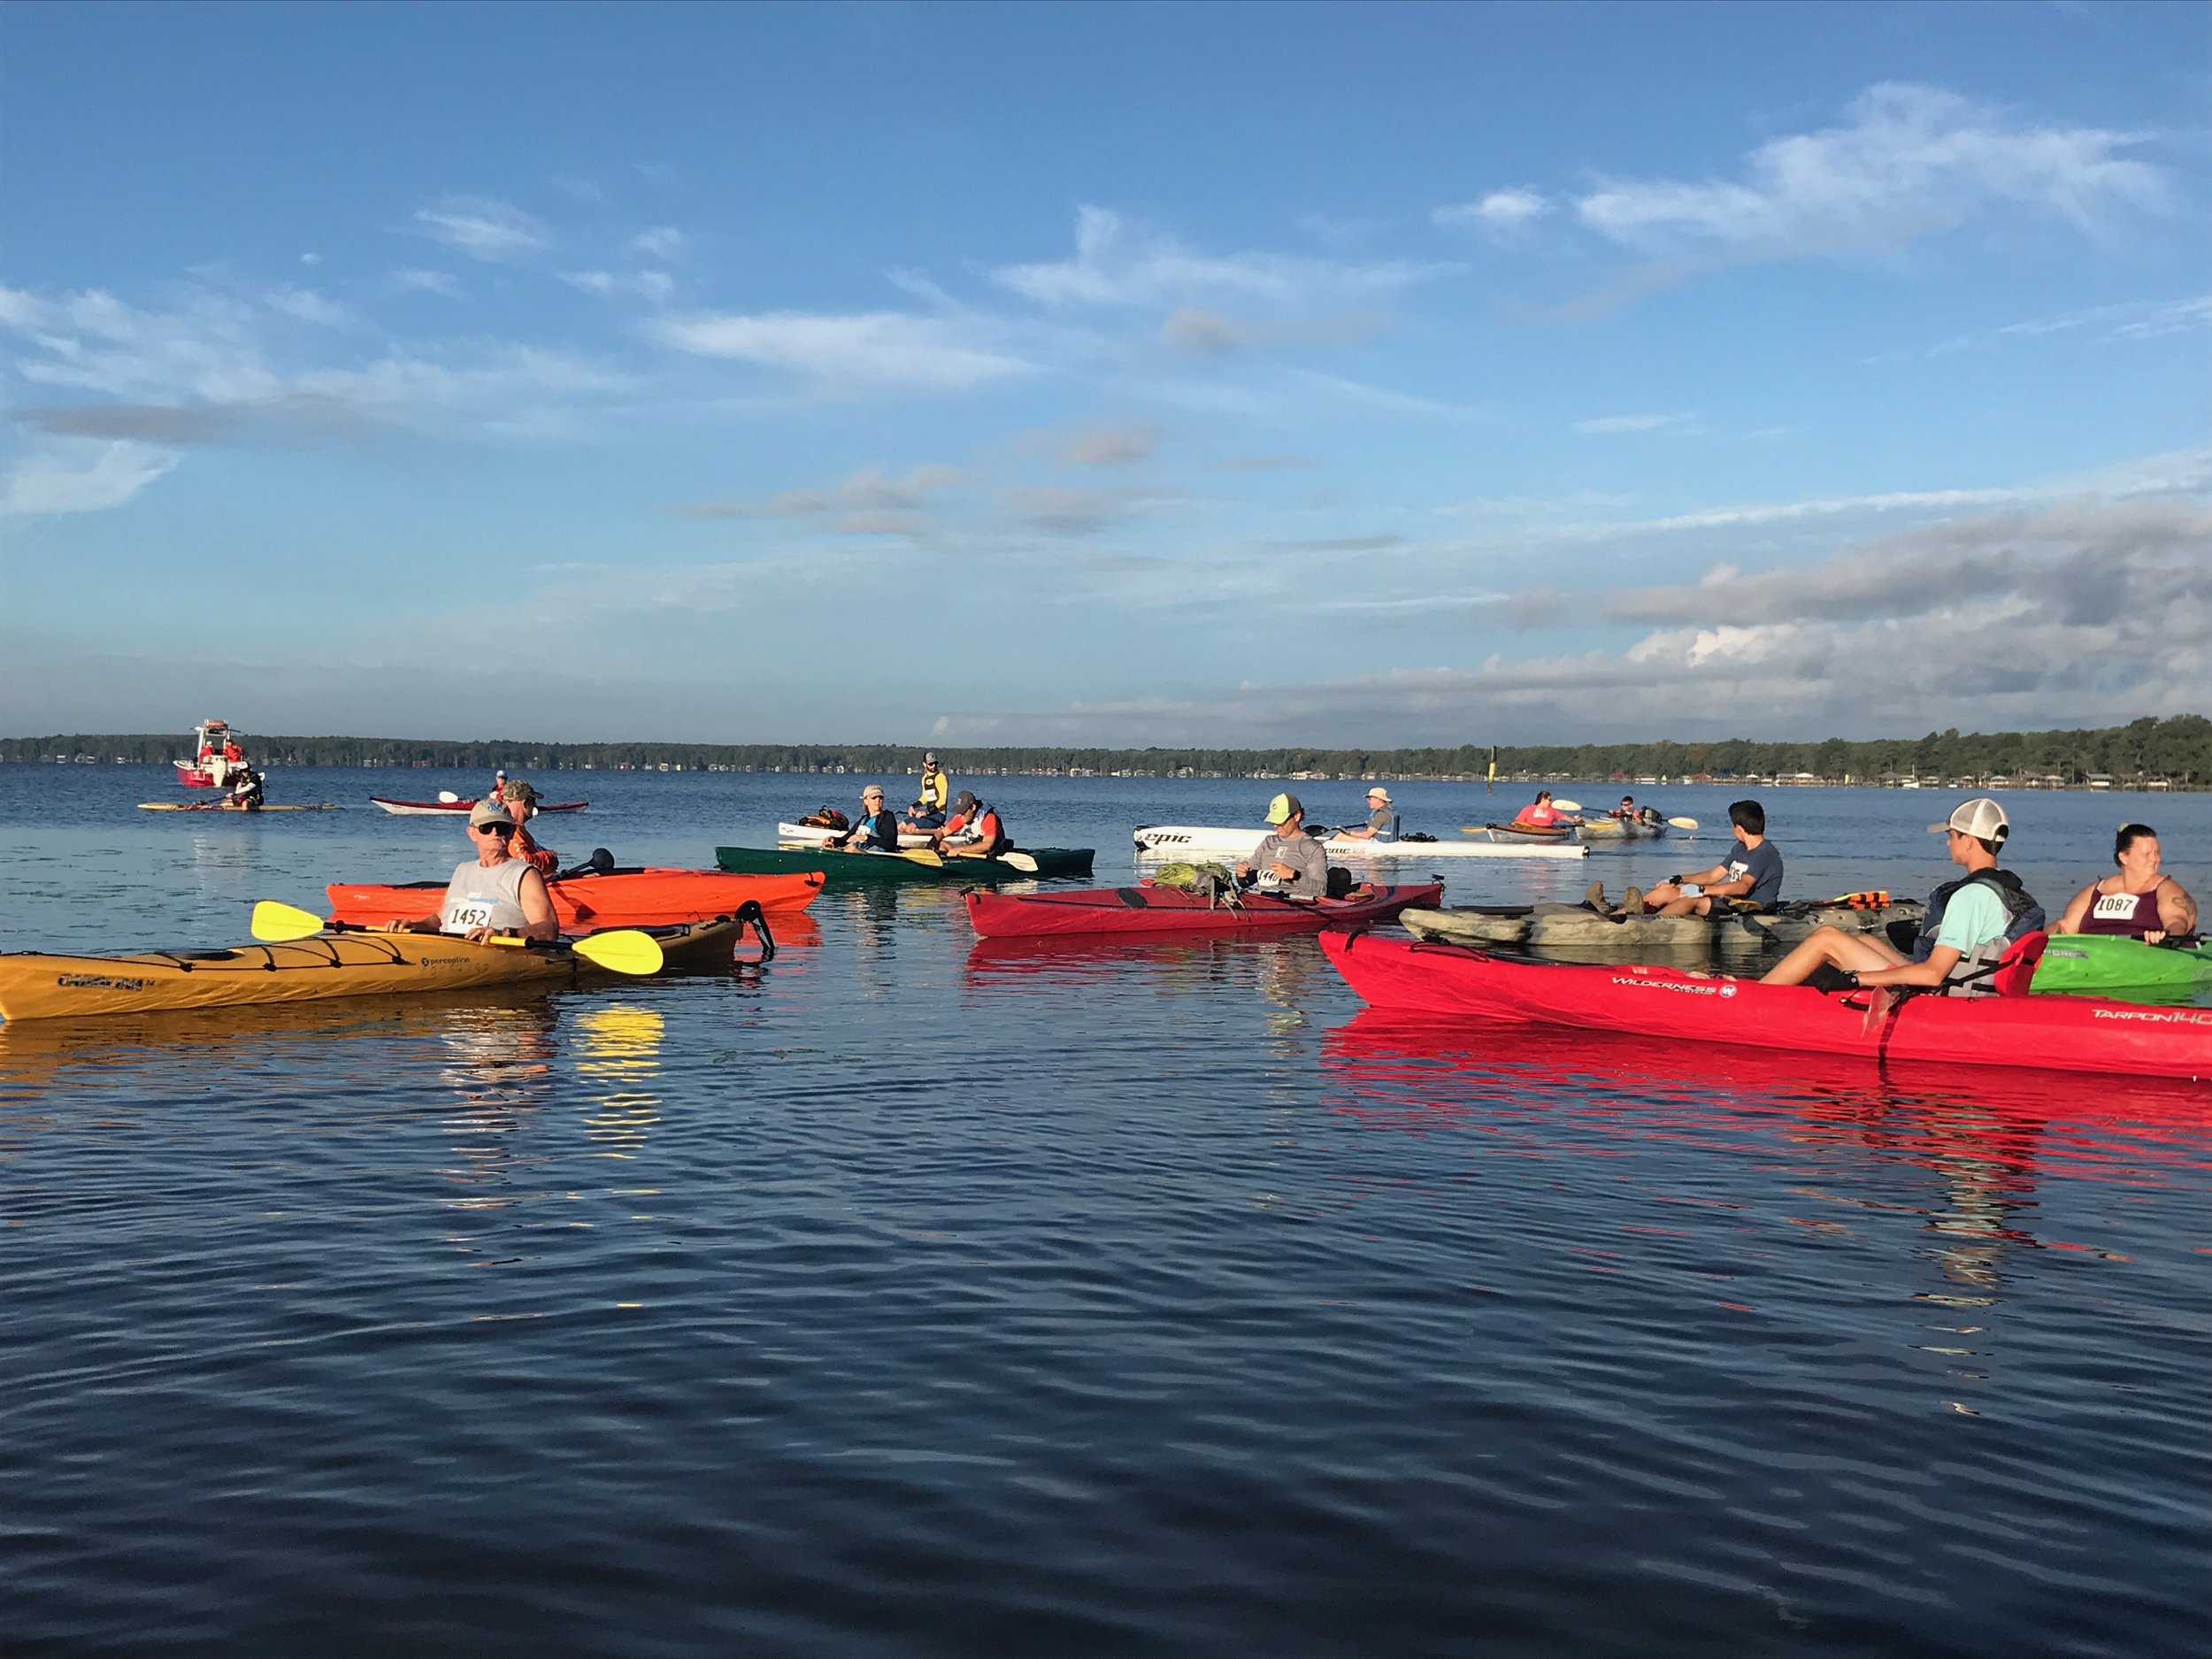 35 paddlers including several stand-up paddleboarders made the 15-mile round trip around Lake Waccamaw.